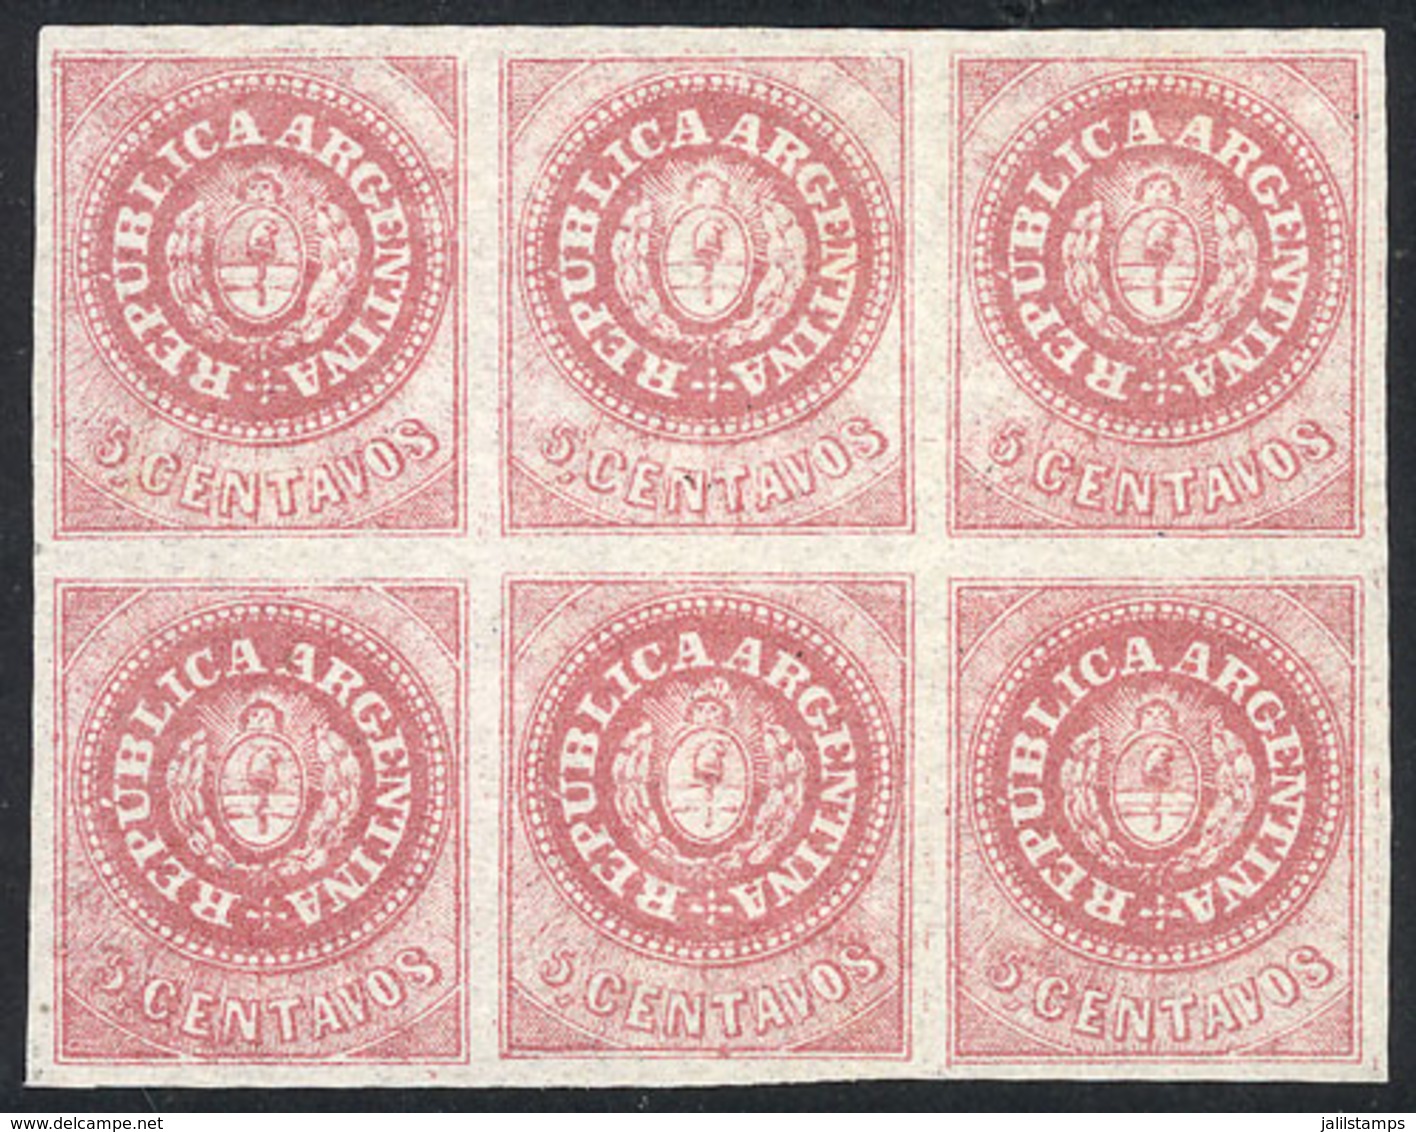 ARGENTINA: GJ.7, 5c. Rose, Beautiful Mint Block Of 6 Stamps, With Plate WEAR, Excellent Quality! - Nuovi